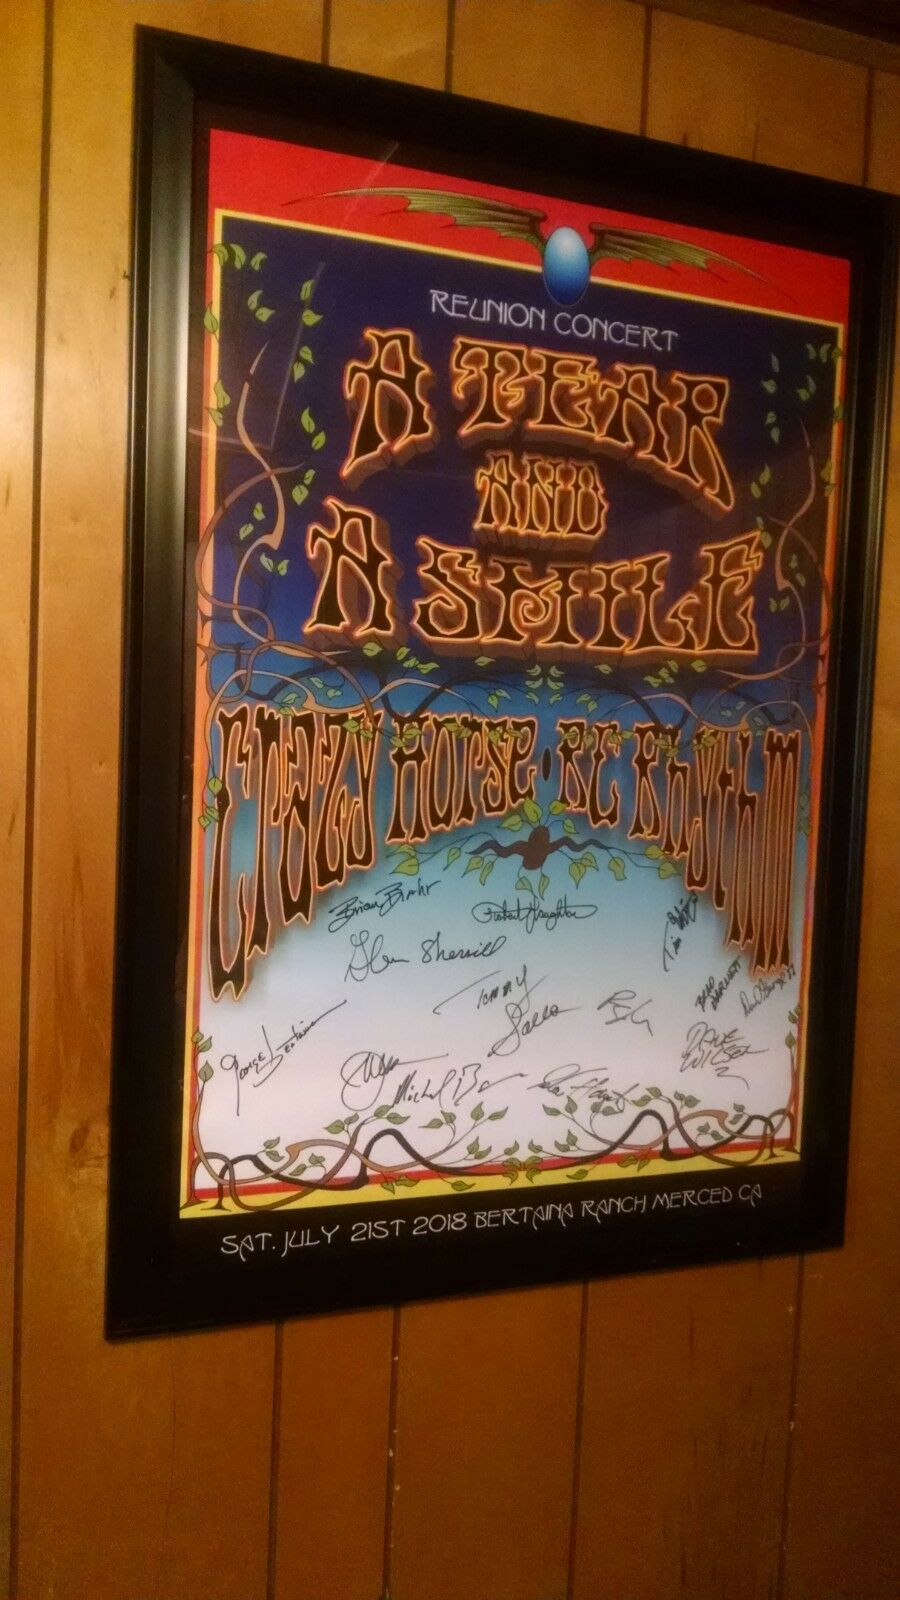 Original Rock Concert Posters Of  A Tear And A Smile, Crazy Horse & R.g. Rhythm